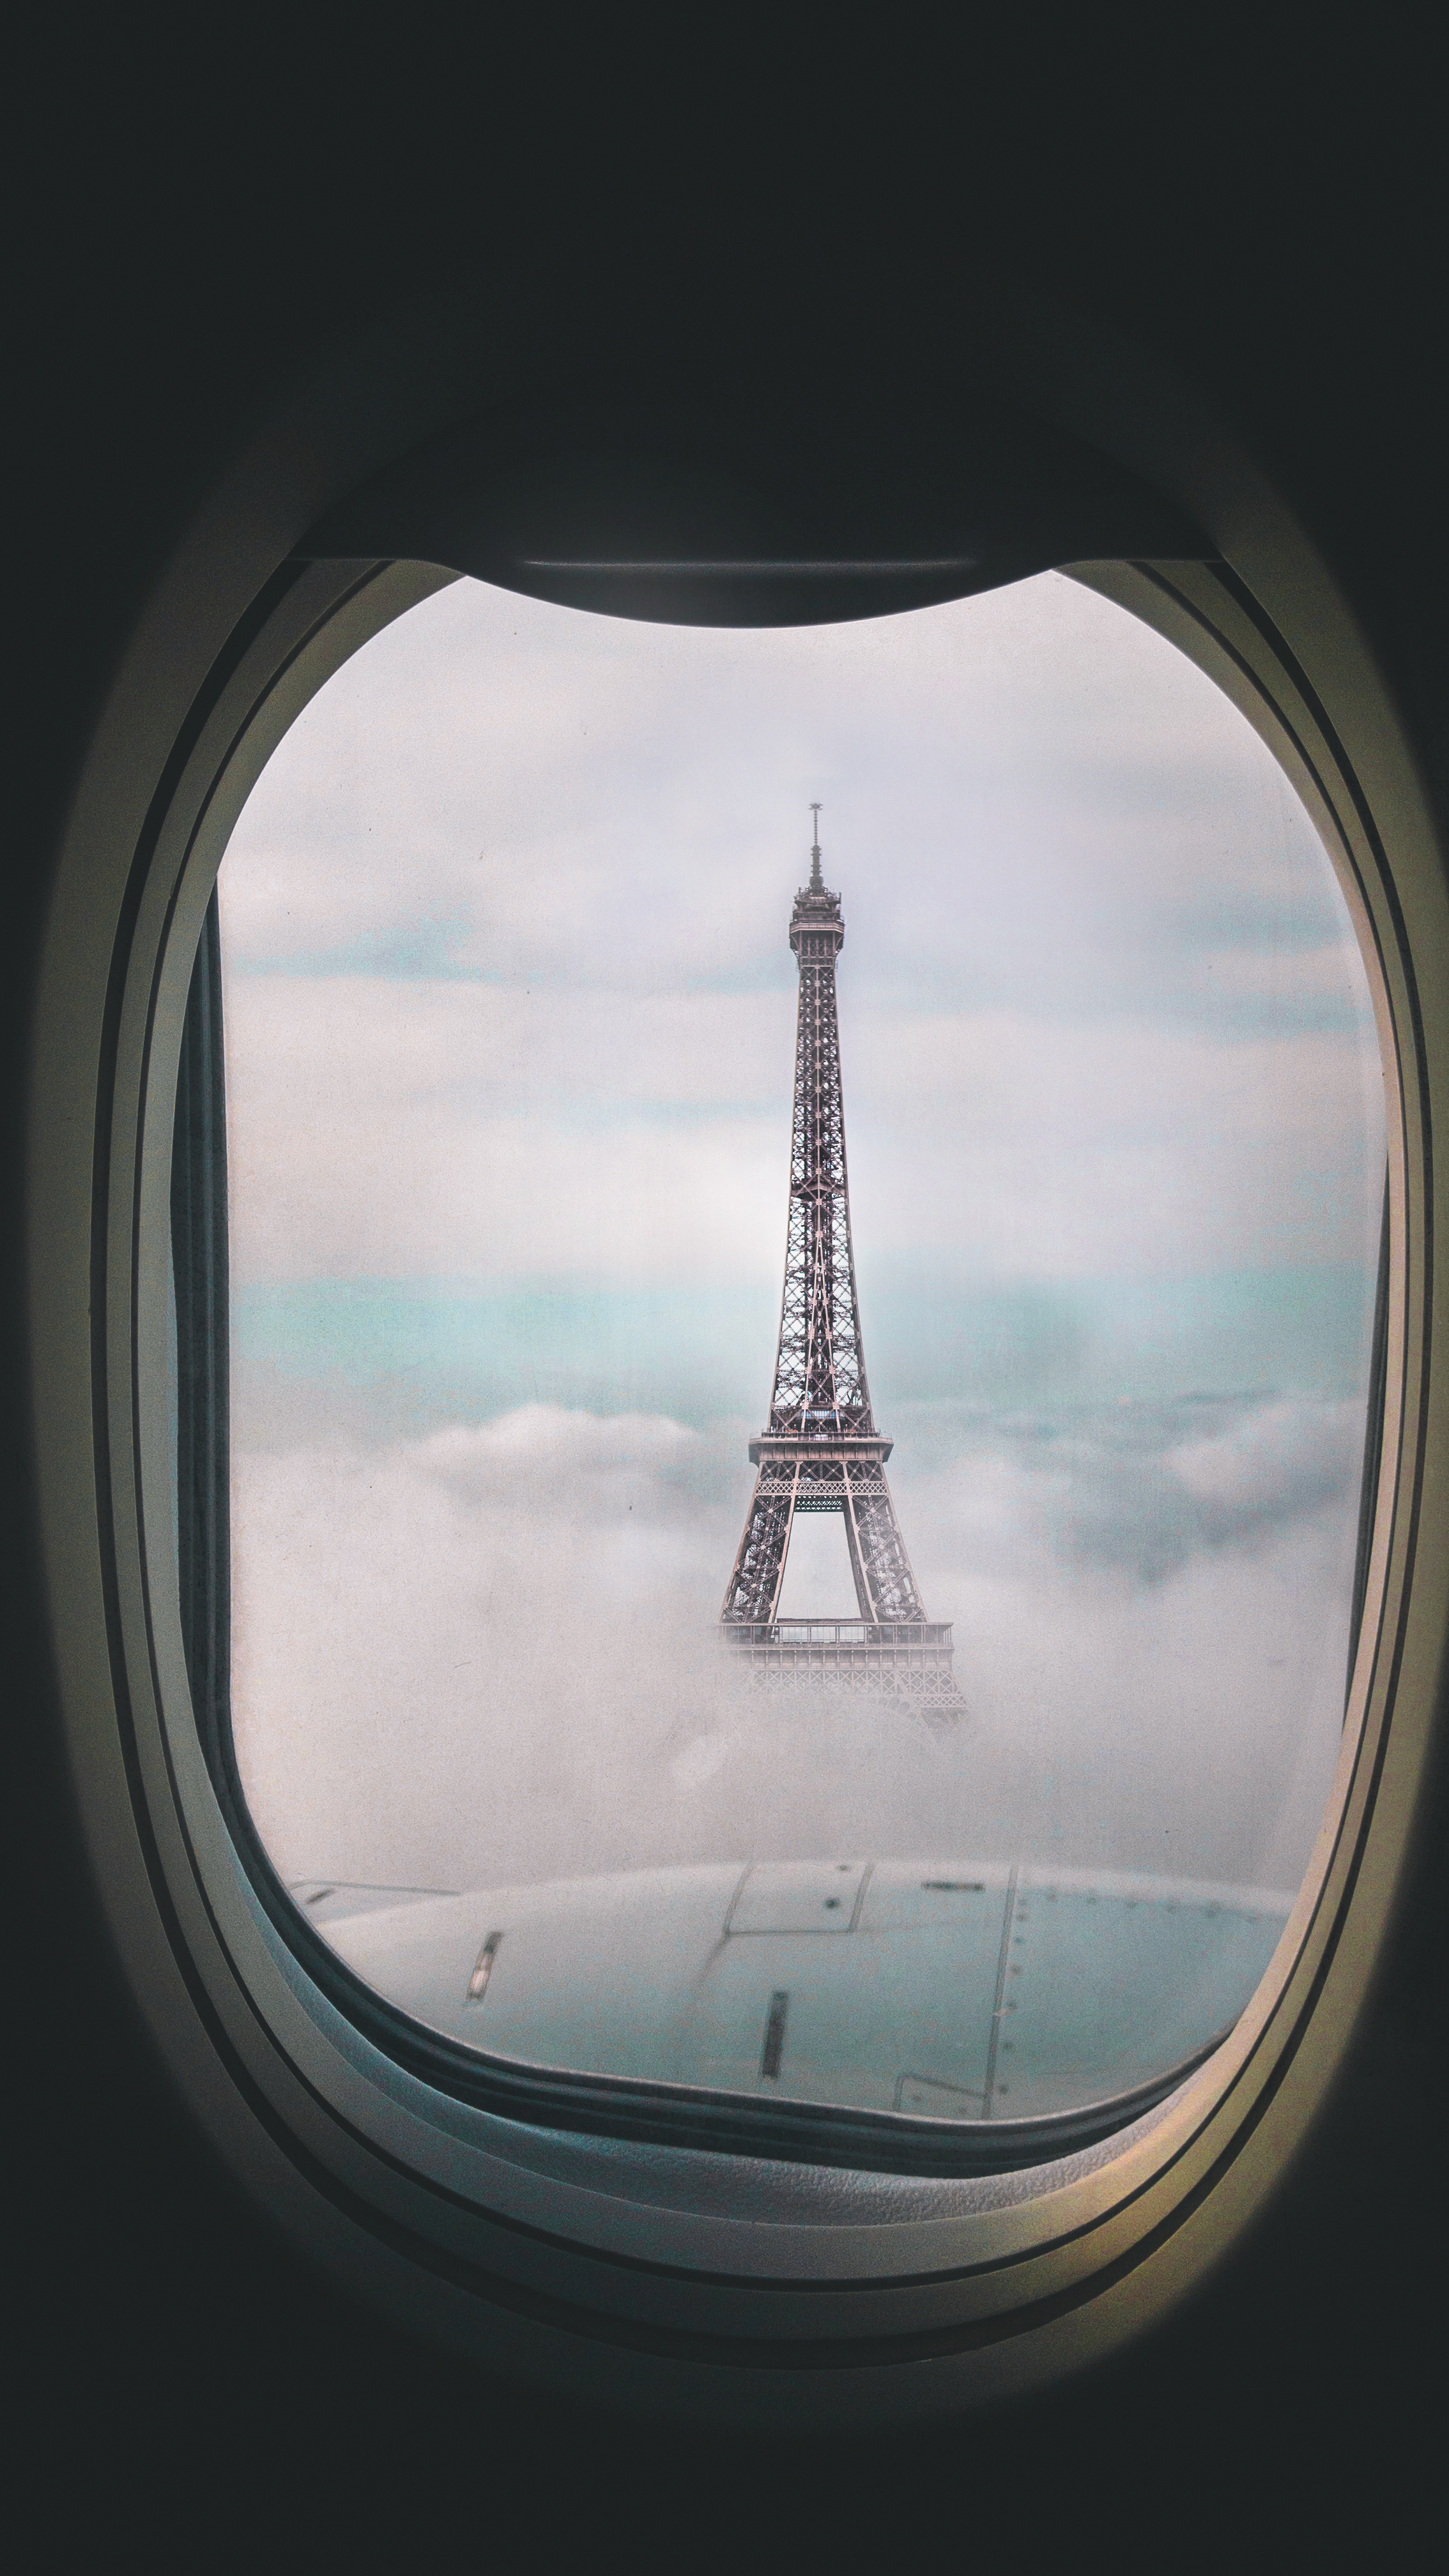 The Eiffel Tower poking through the clouds behind an airplane window